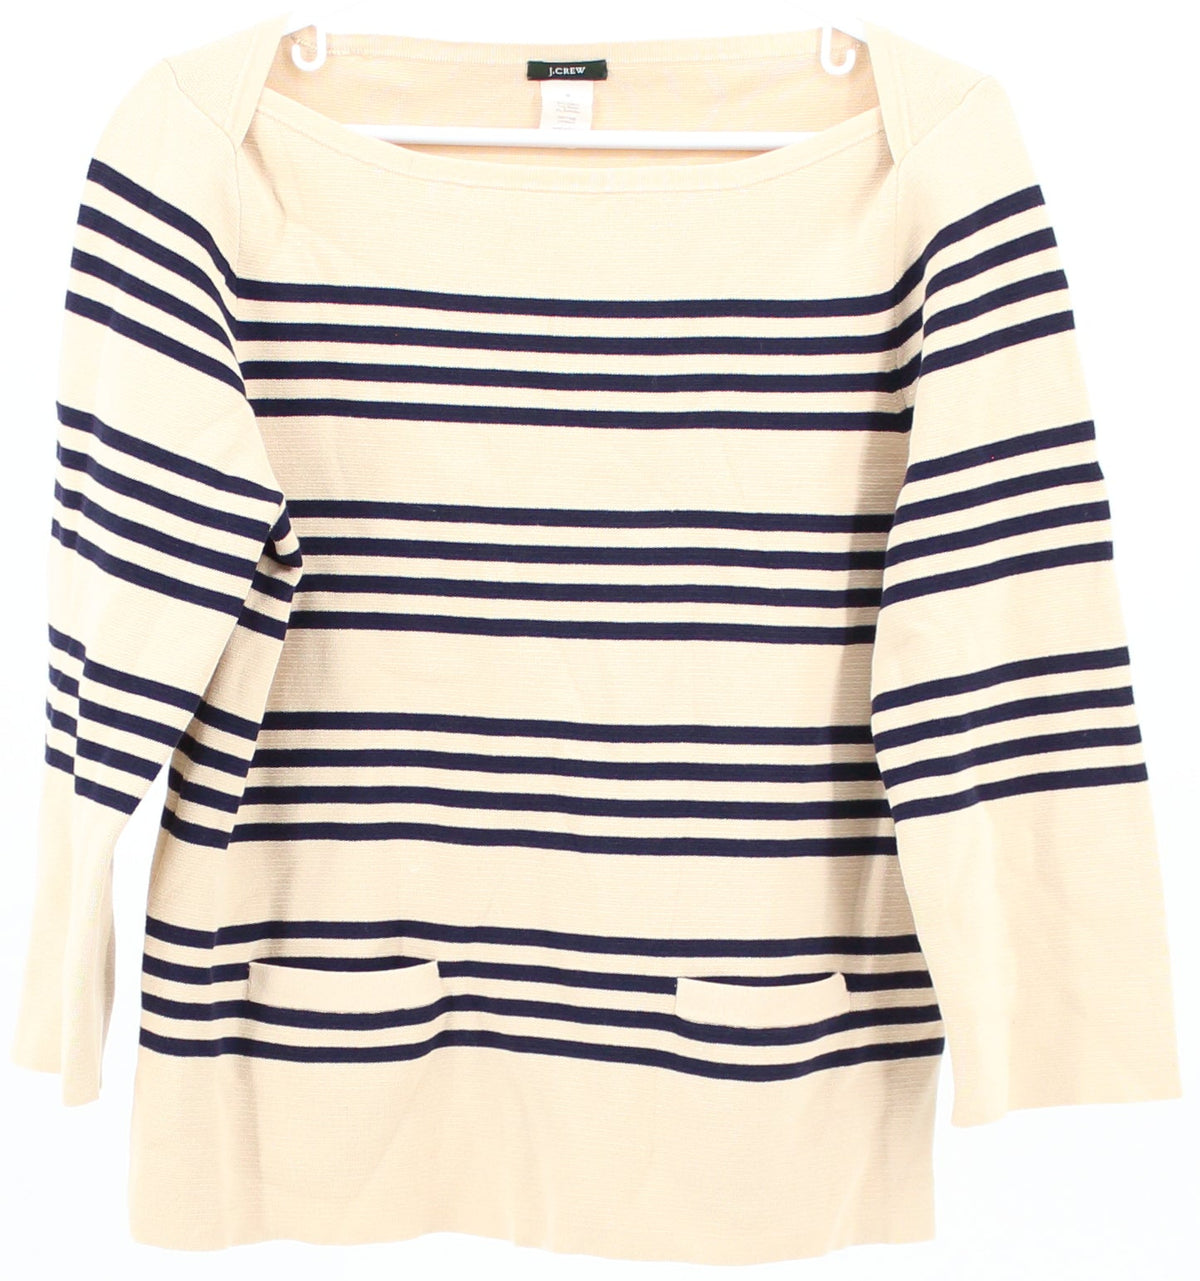 J Crew Cream and Navy Blue Striped Knit Blouse